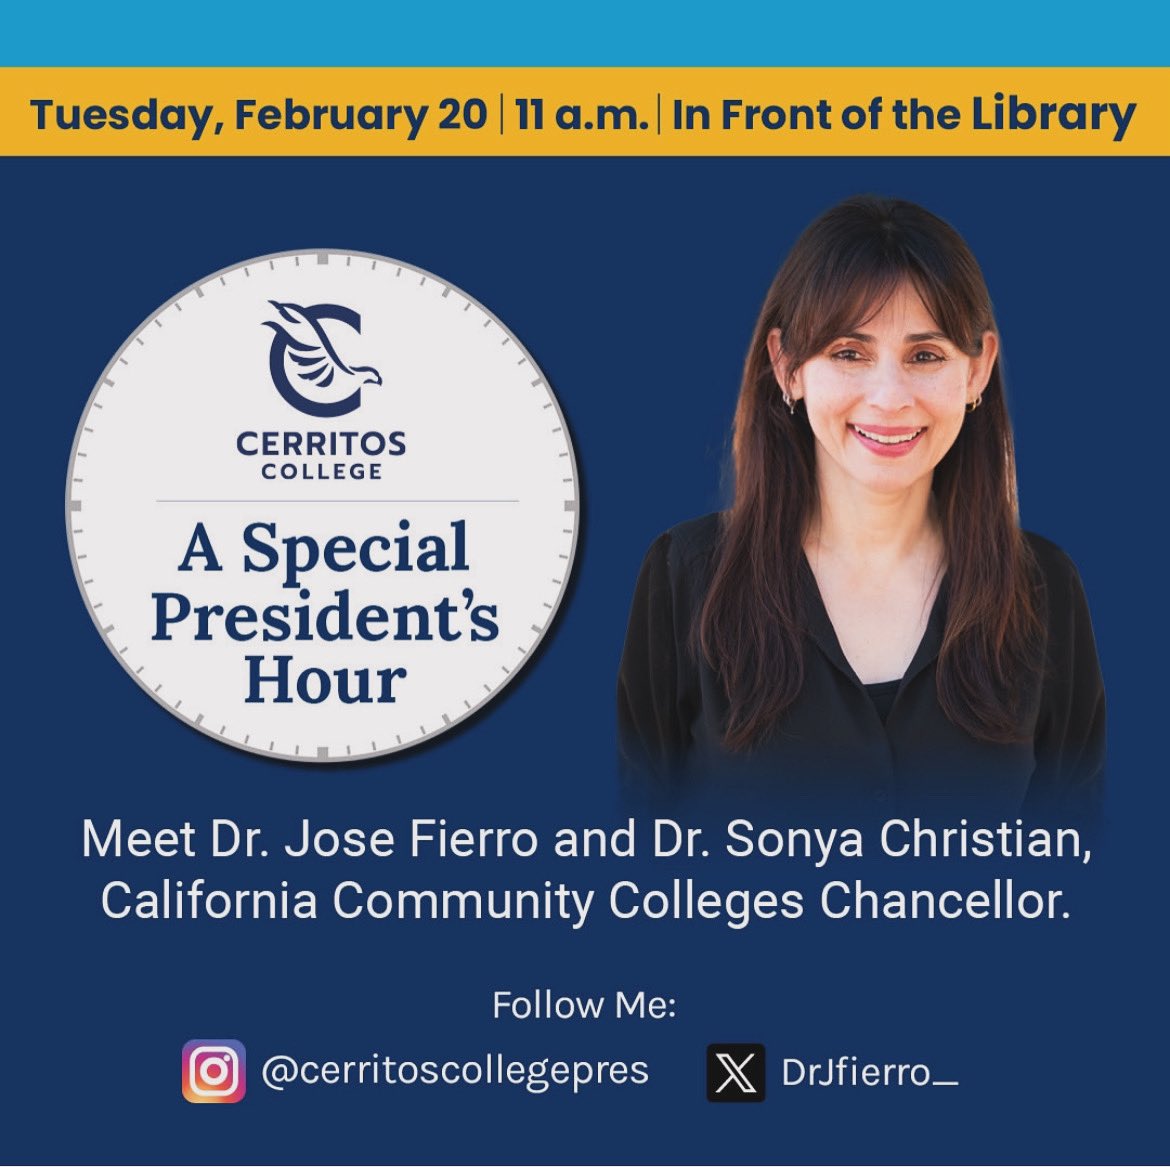 Come and spend a few minutes with me and @californiacommunitycolleges Chancellor @sonya_christian | we have cookies 🍪